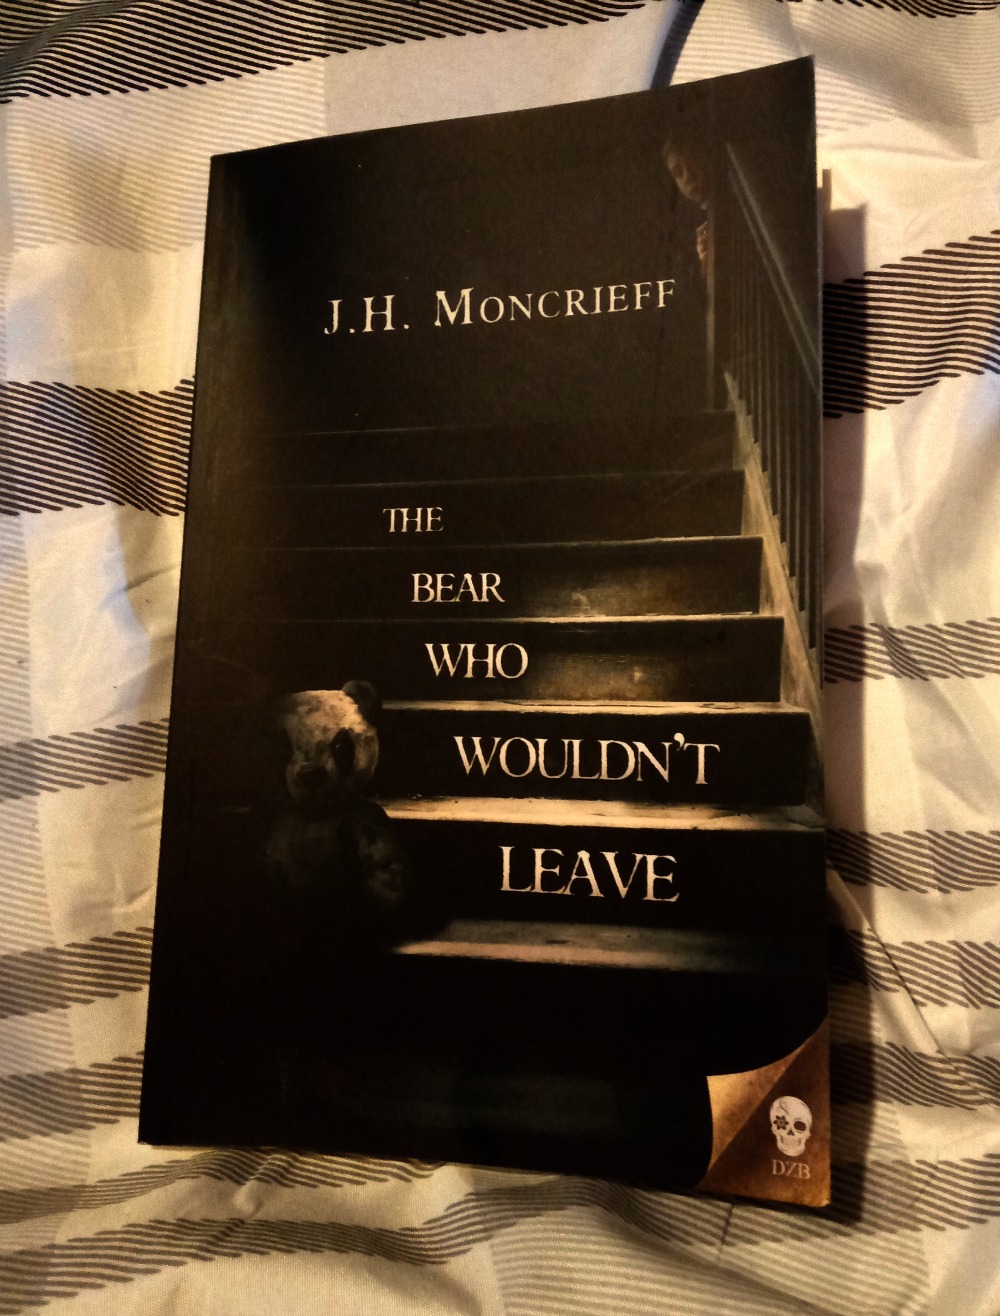 The Bear Who Wouldn't Leave by JH Moncrieff book cover